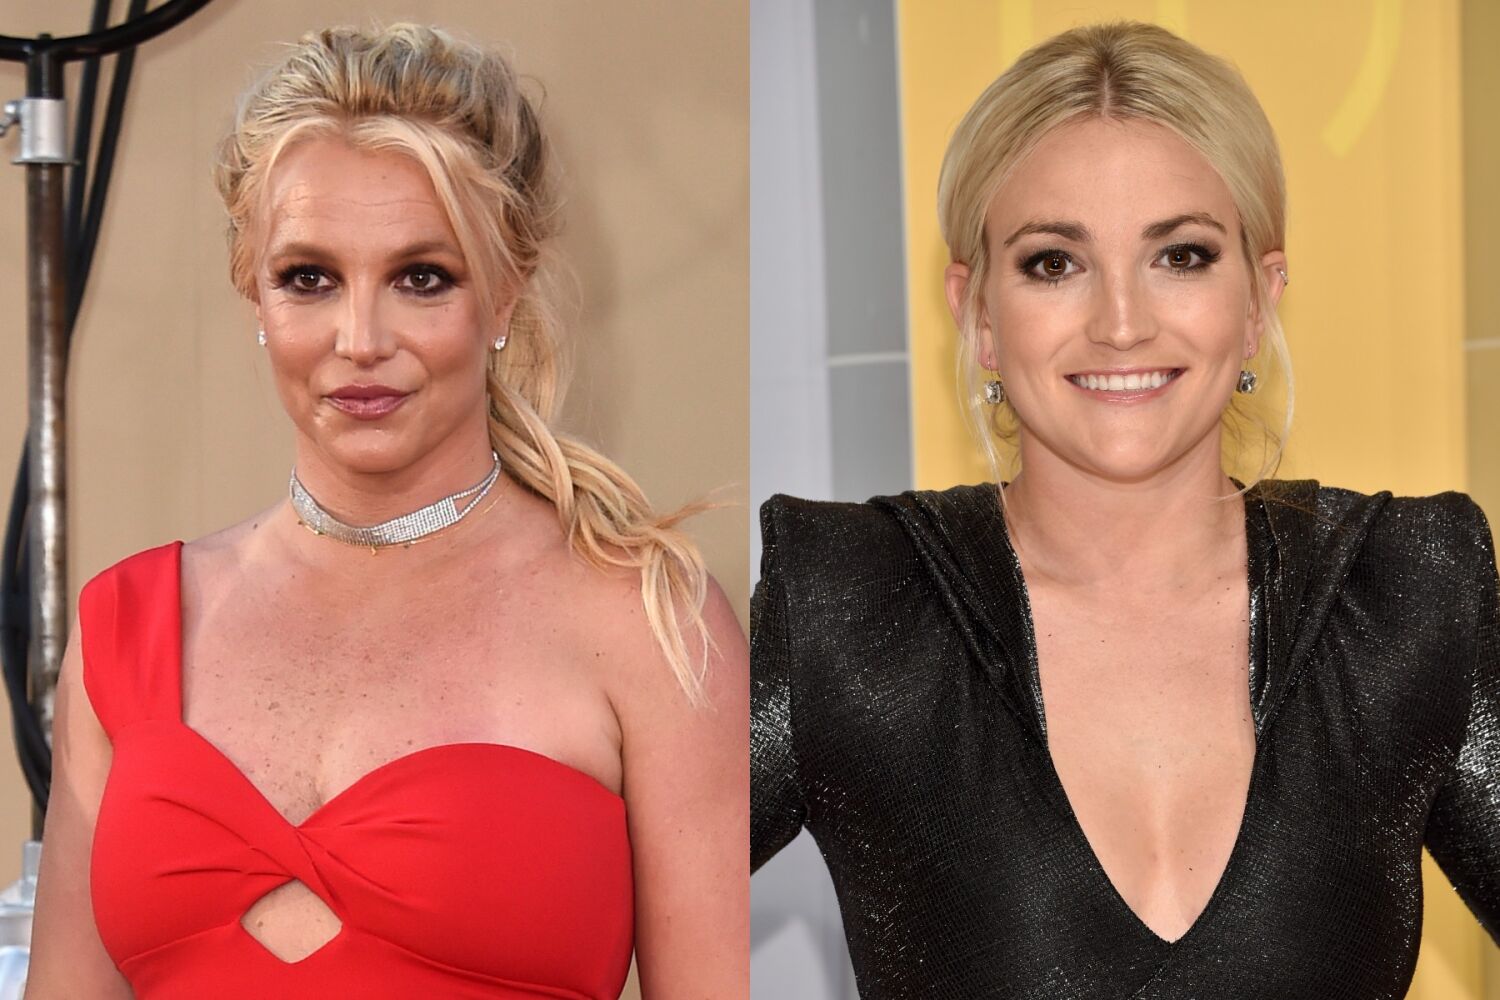 Britney Spears and Jamie Lynn Spears reunite on 'Zoey 102' set after public feud